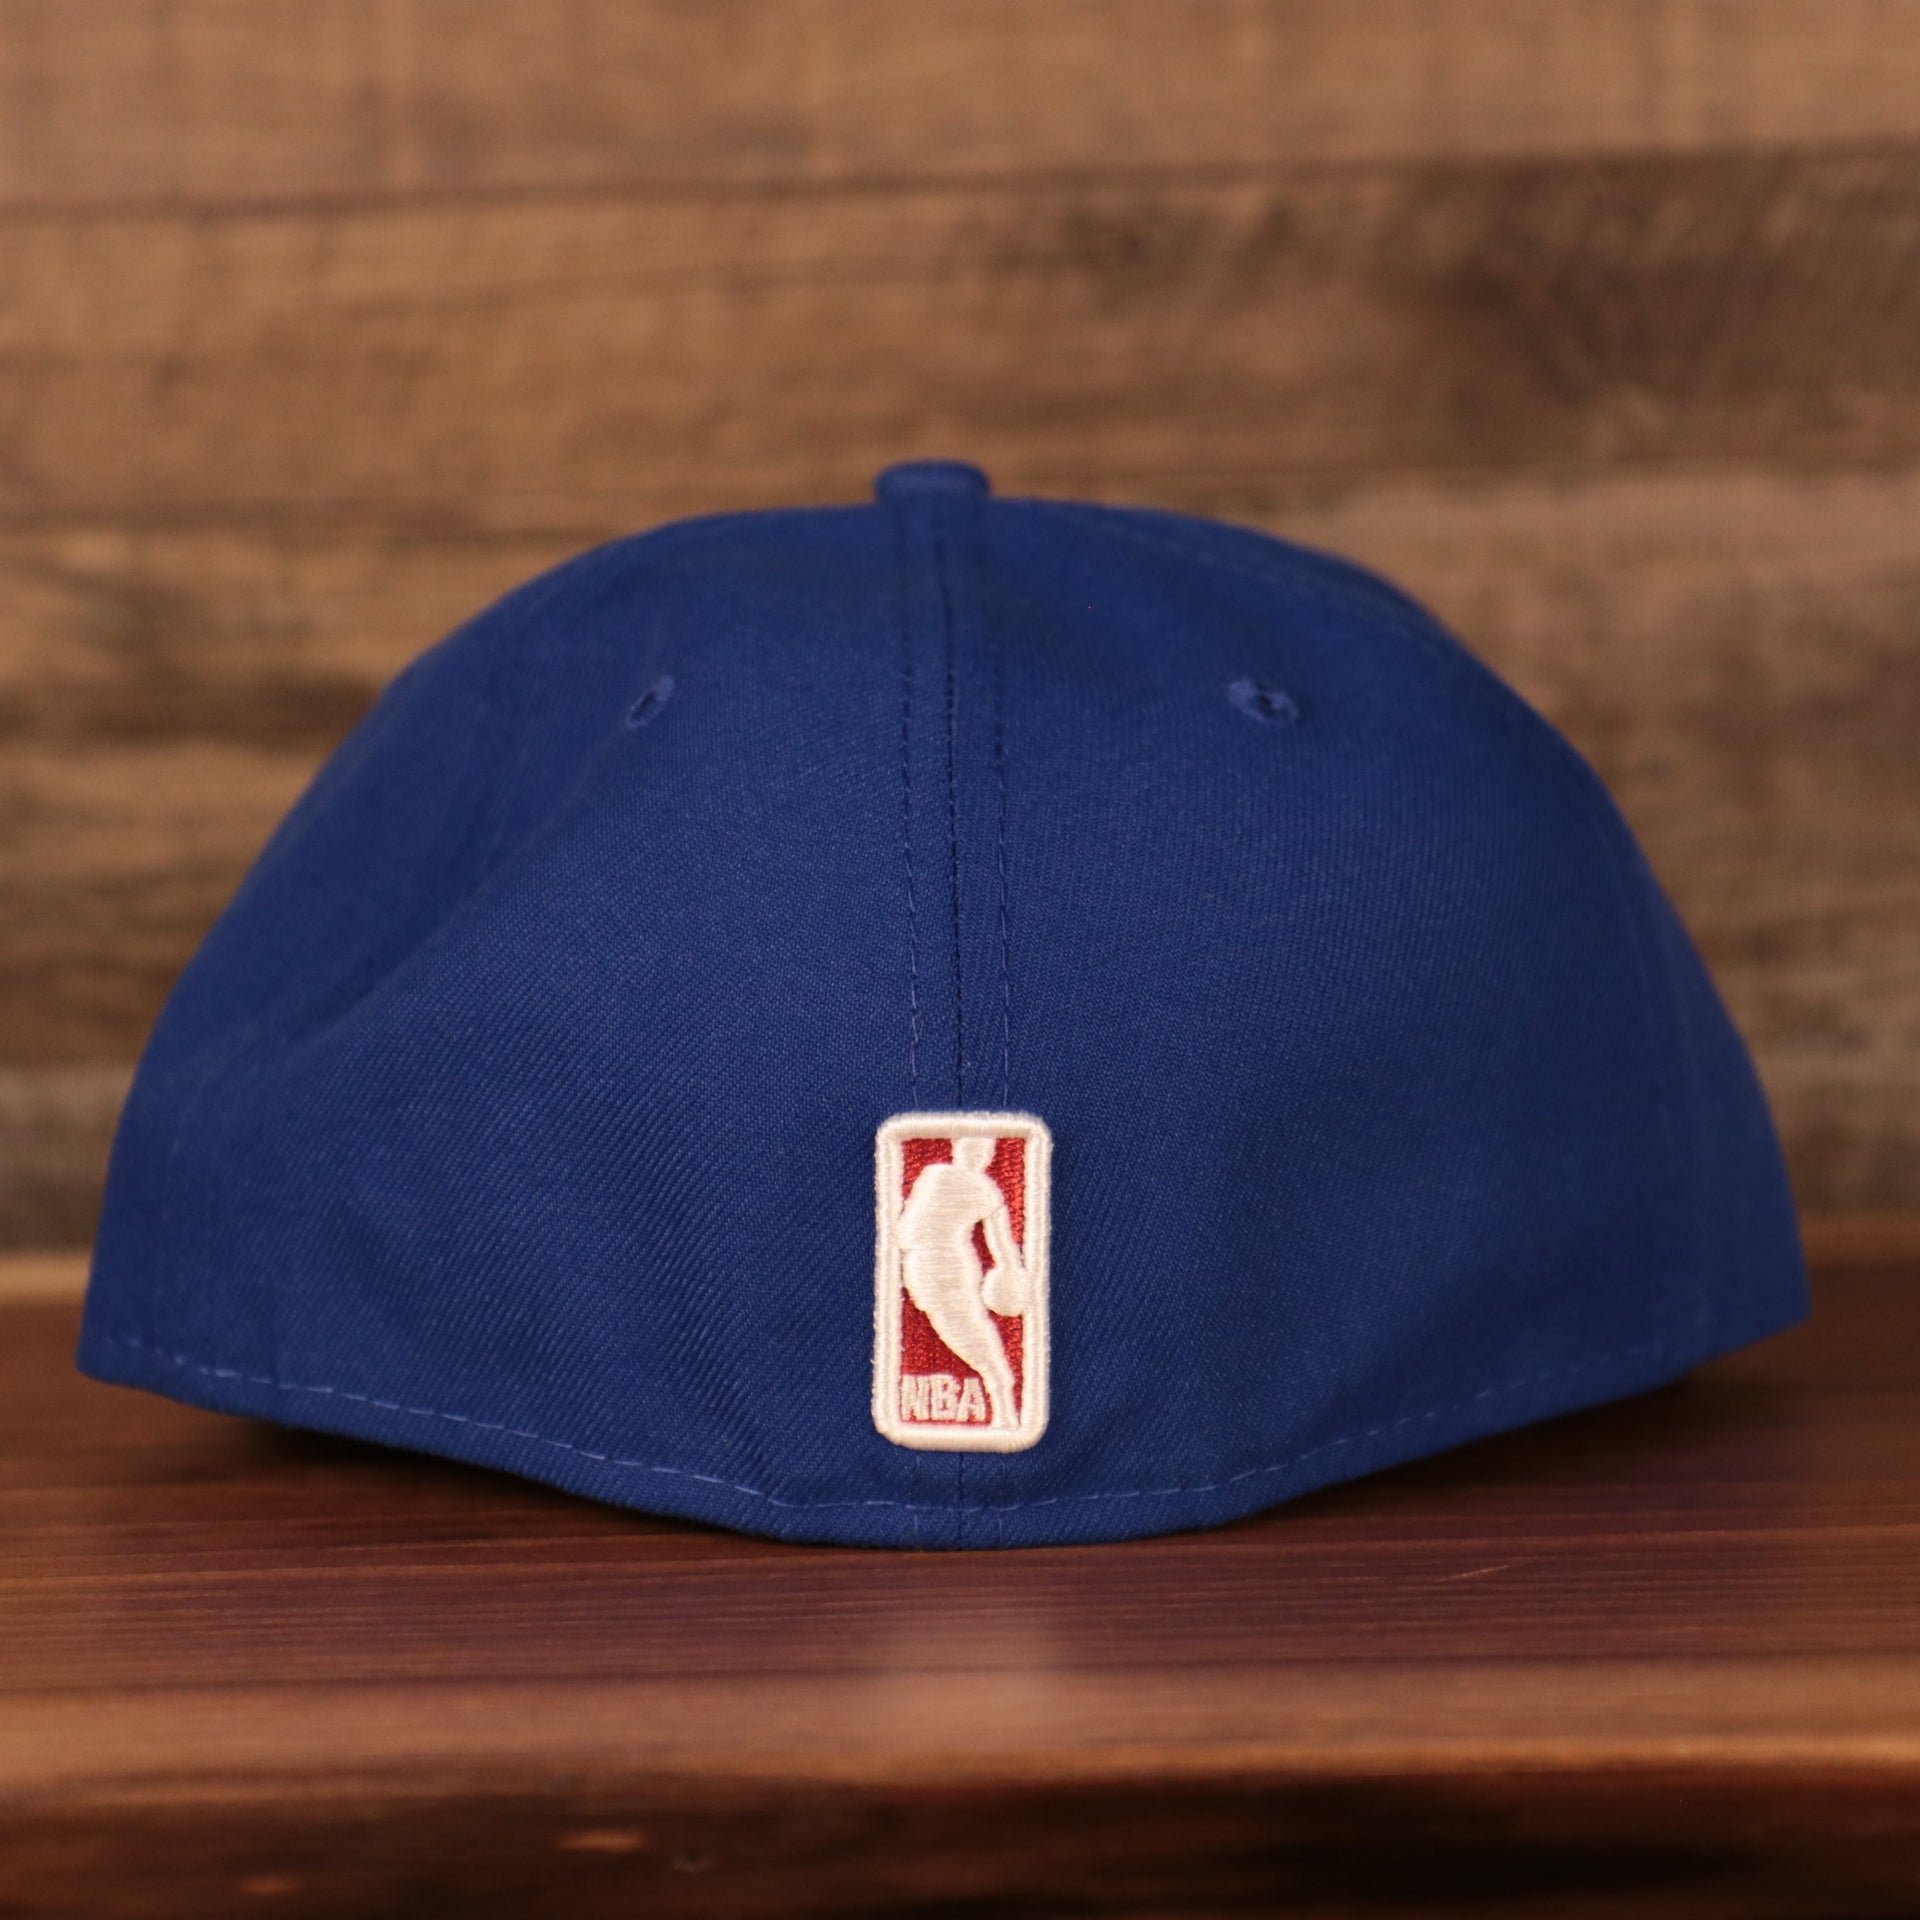 NBA logo on the Philadelphia 76ers Grey Bottom | Royal Blue 59Fifty Fitted Cap